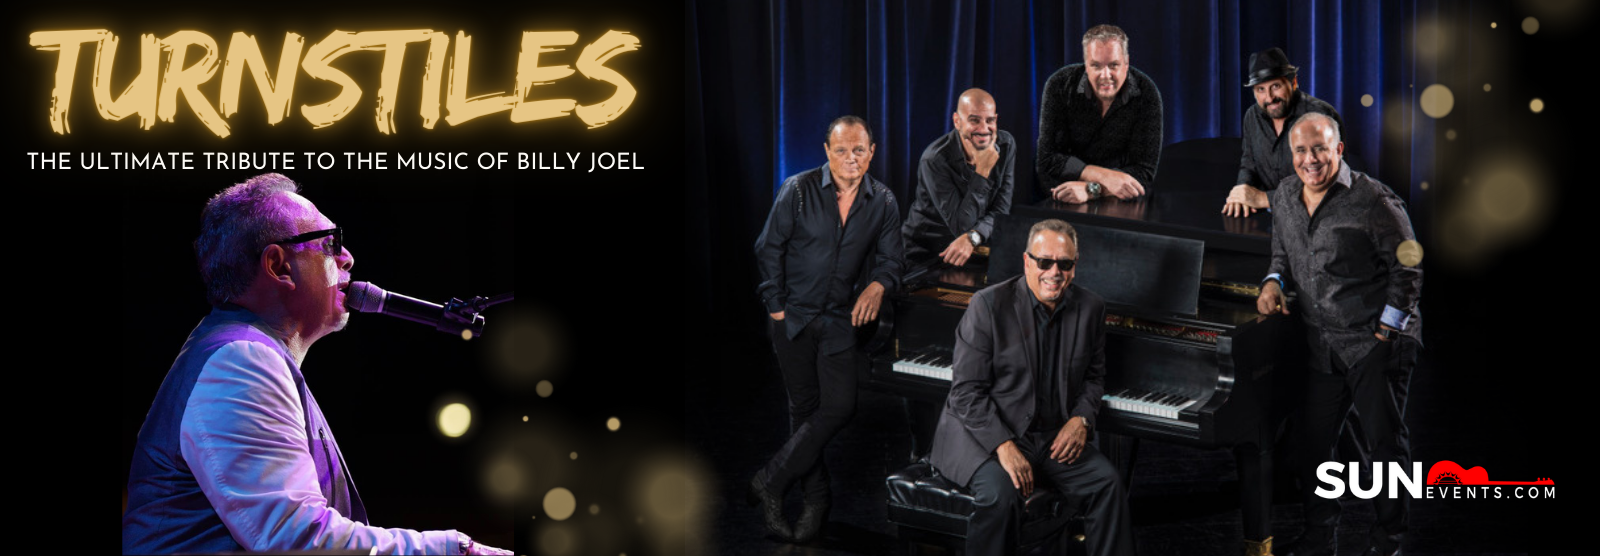 Turnstiles- The Ultimate Tribute to the Music of Billy Joel